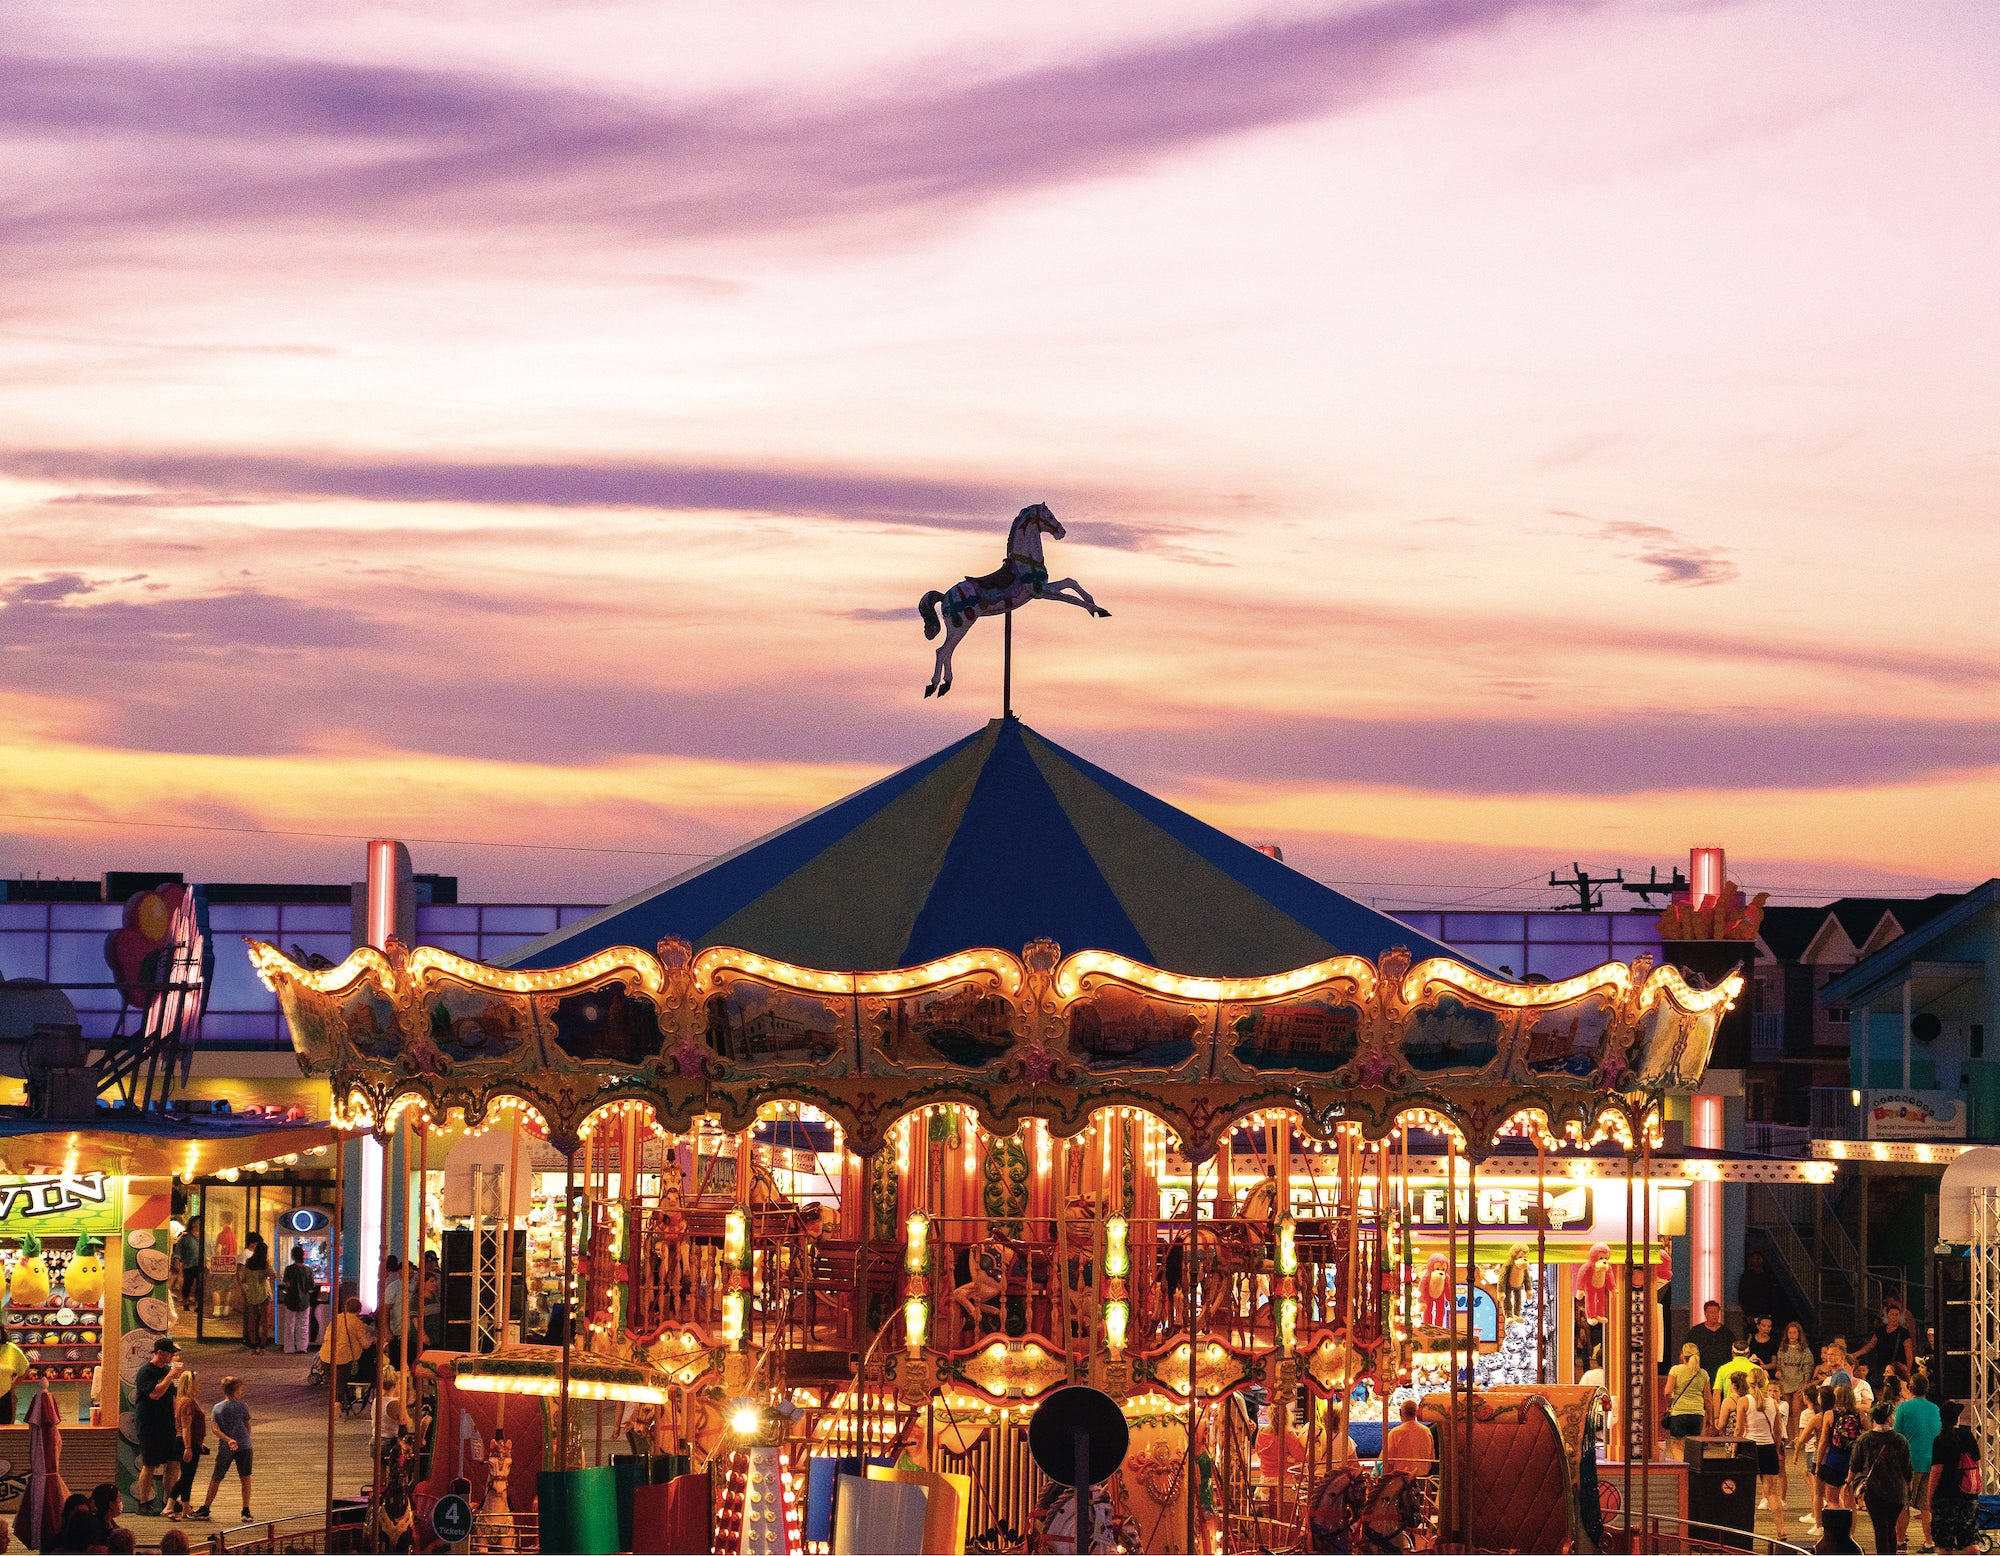 Morey's Pier Carousel in Summer Dusk - Matted 11x14